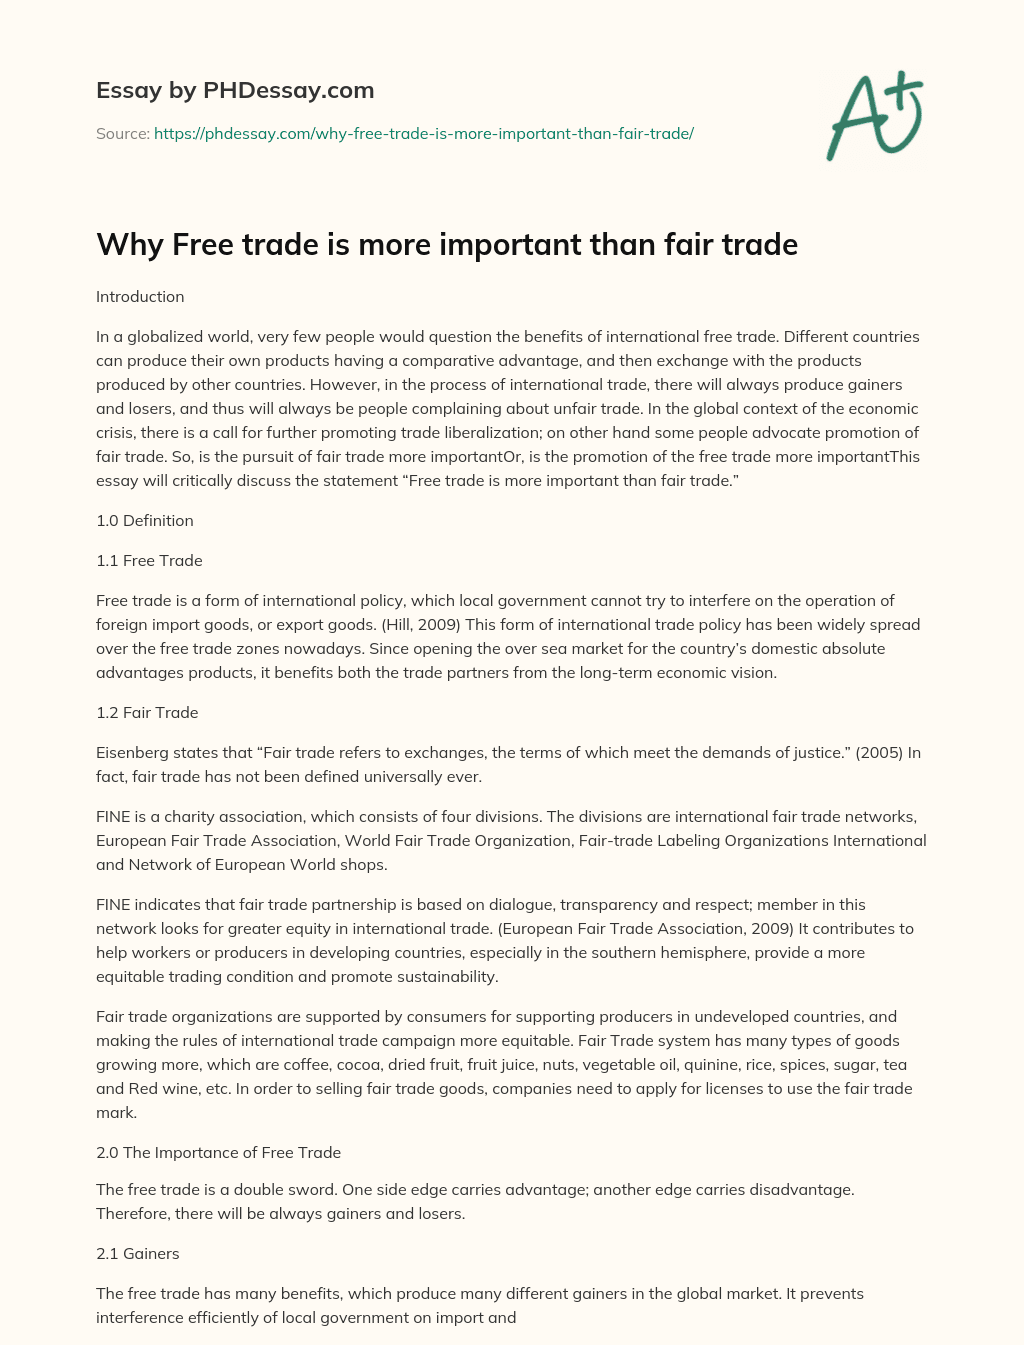 Why Free trade is more important than fair trade essay